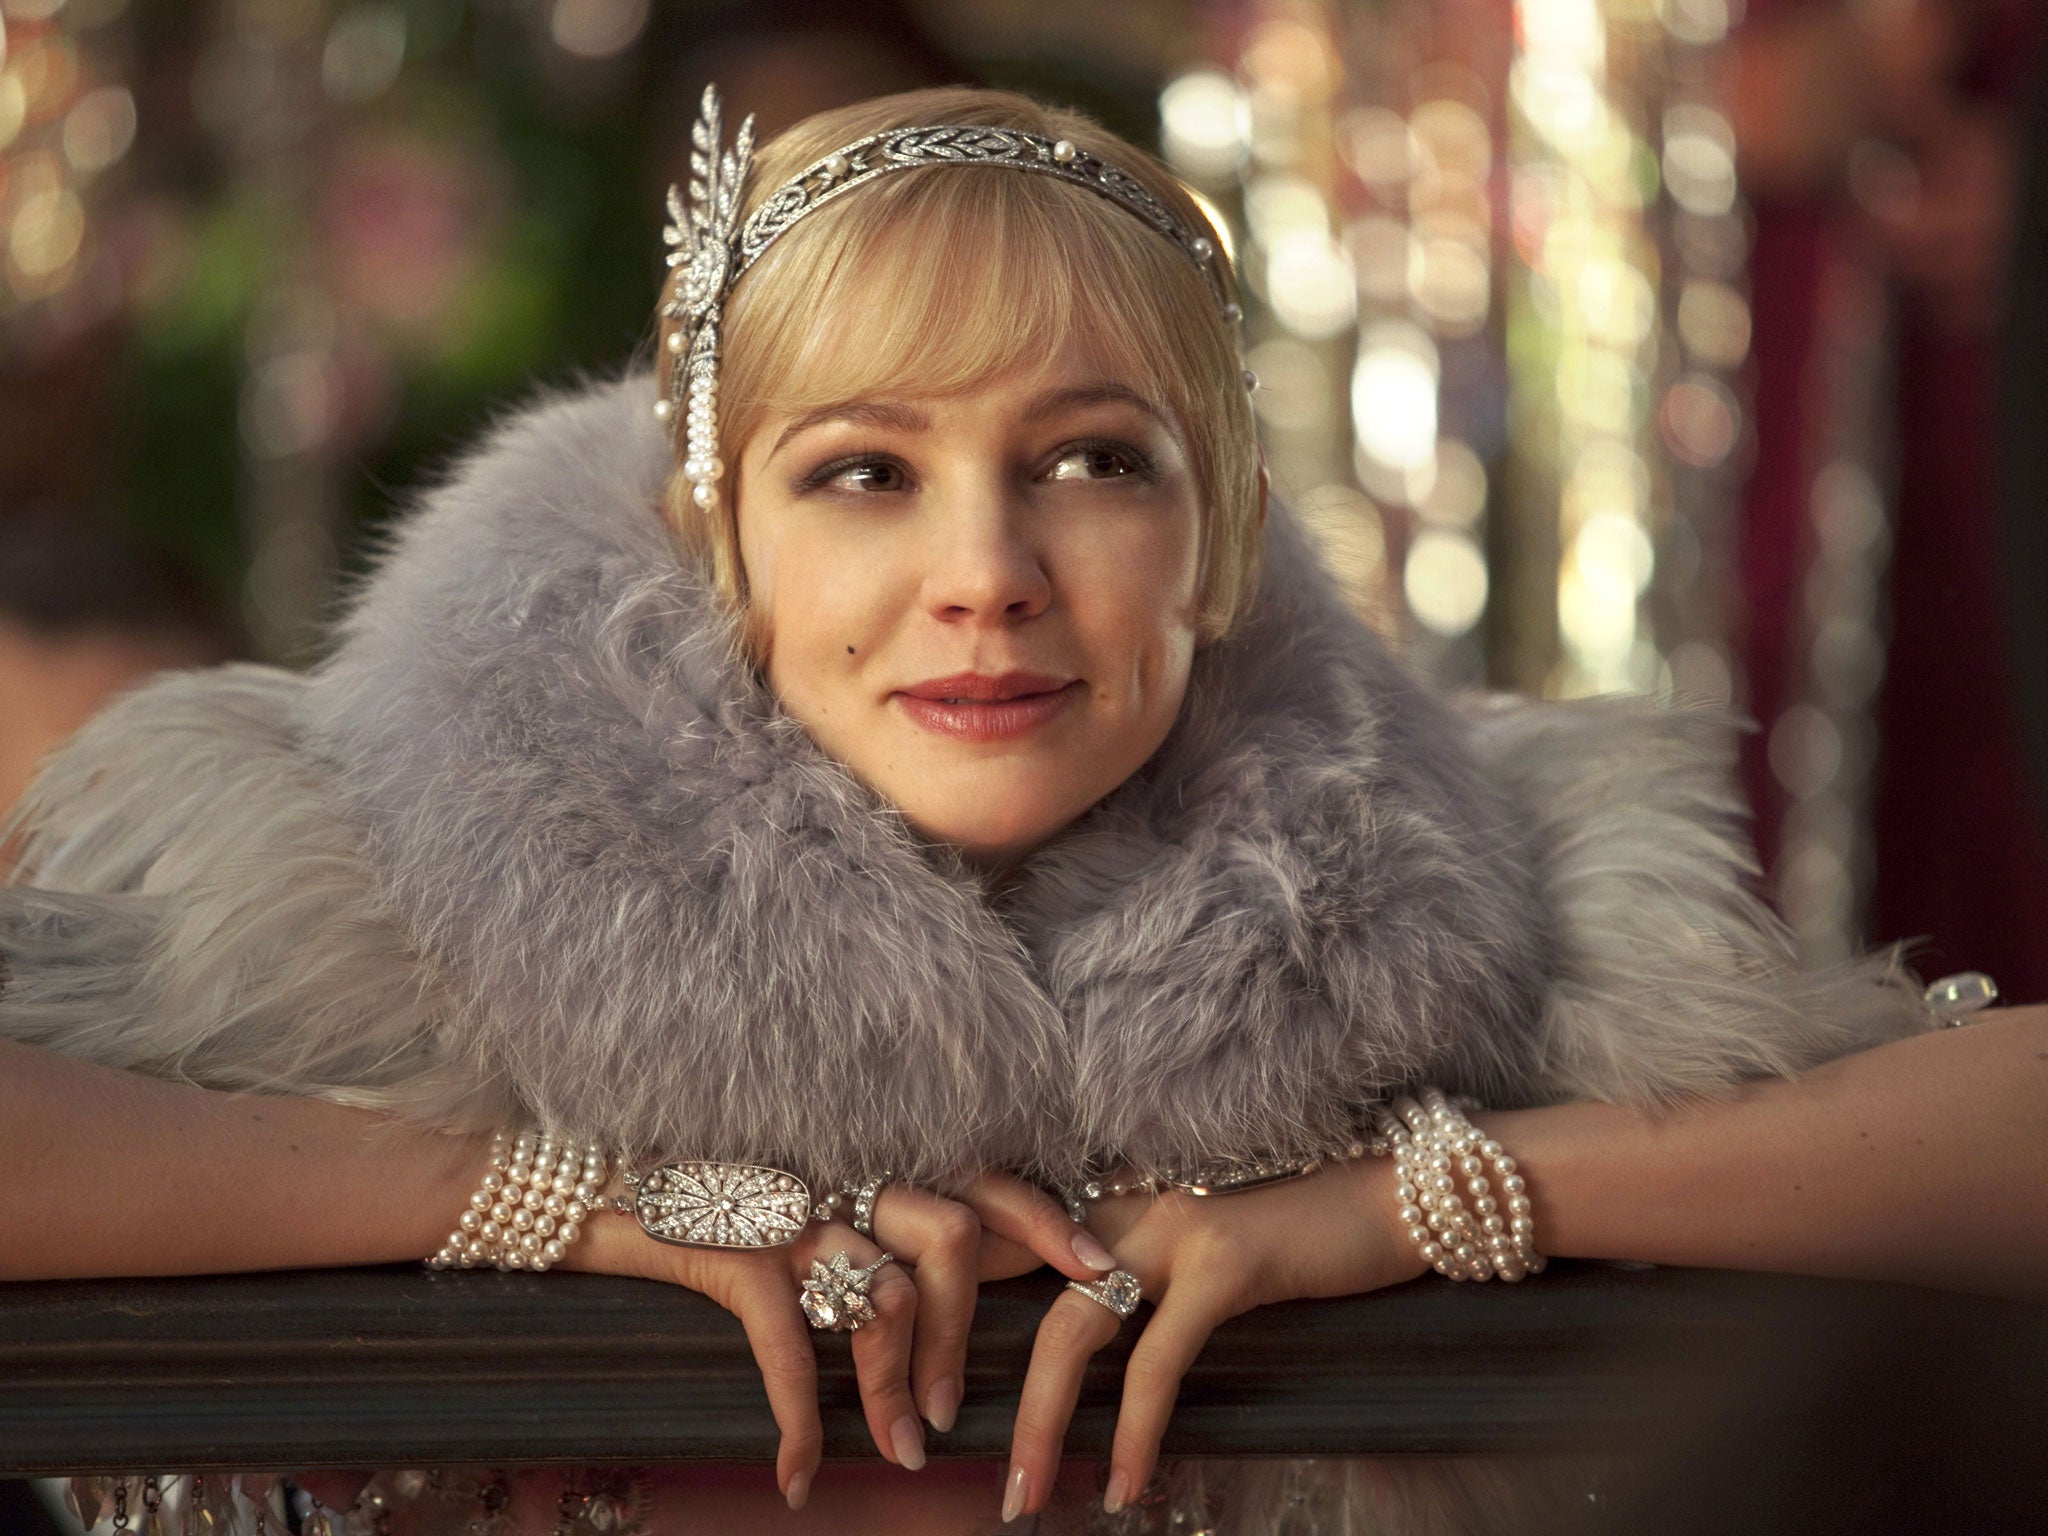 The critics haven't been universally kind to Baz Luhrmann's The Great Gatsby